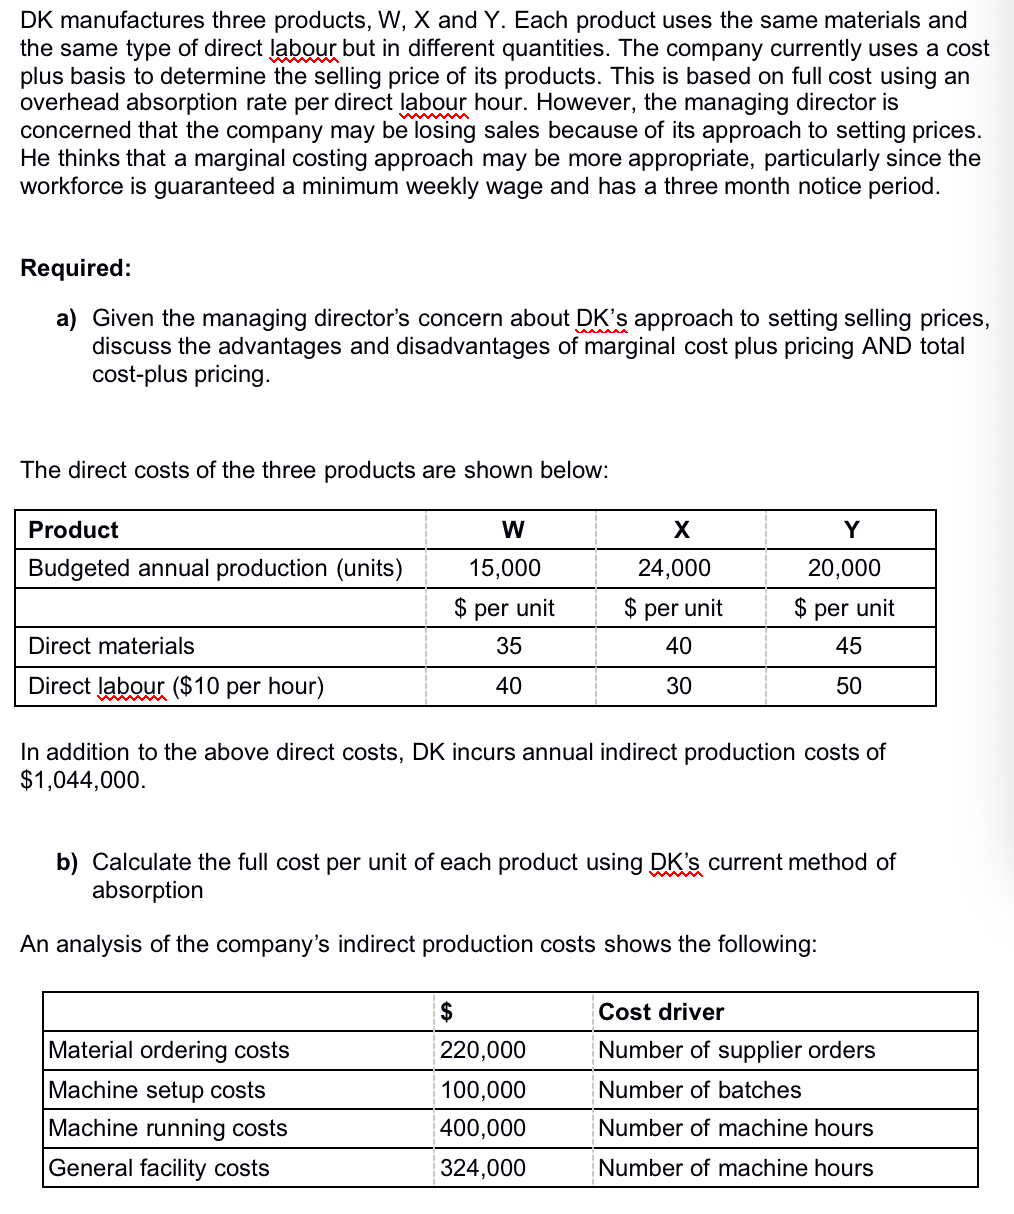 DK manufactures three products, W, X and Y. Each product uses the same materials and
the same type of direct labour but in different quantities. The company currently uses a cost
plus basis to determine the selling price of its products. This is based on full cost using an
overhead absorption rate per direct labour hour. However, the managing director is
concerned that the company may be losing sales because of its approach to setting prices.
He thinks that a marginal costing approach may be more appropriate, particularly since the
workforce is guaranteed a minimum weekly wage and has a three month notice period.
Required:
a) Given the managing director's concern about DK's approach to setting selling prices,
discuss the advantages and disadvantages of marginal cost plus pricing AND total
cost-plus pricing.
The direct costs of the three products are shown below:
Product
W
Y
Budgeted annual production (units)
15,000
24,000
20,000
$ per unit
$ per unit
$ per unit
Direct materials
35
40
45
Direct labour ($10 per hour)
40
30
50
In addition to the above direct costs, DK incurs annual indirect production costs of
$1,044,000.
b) Calculate the full cost per unit of each product using DK's current method of
absorption
An analysis of the company's indirect production costs shows the following:
2$
Cost driver
Material ordering costs
220,000
Number of supplier orders
Machine setup costs
100,000
Number of batches
Machine running costs
400,000
Number of machine hours
General facility costs
324,000
Number of machine hours
